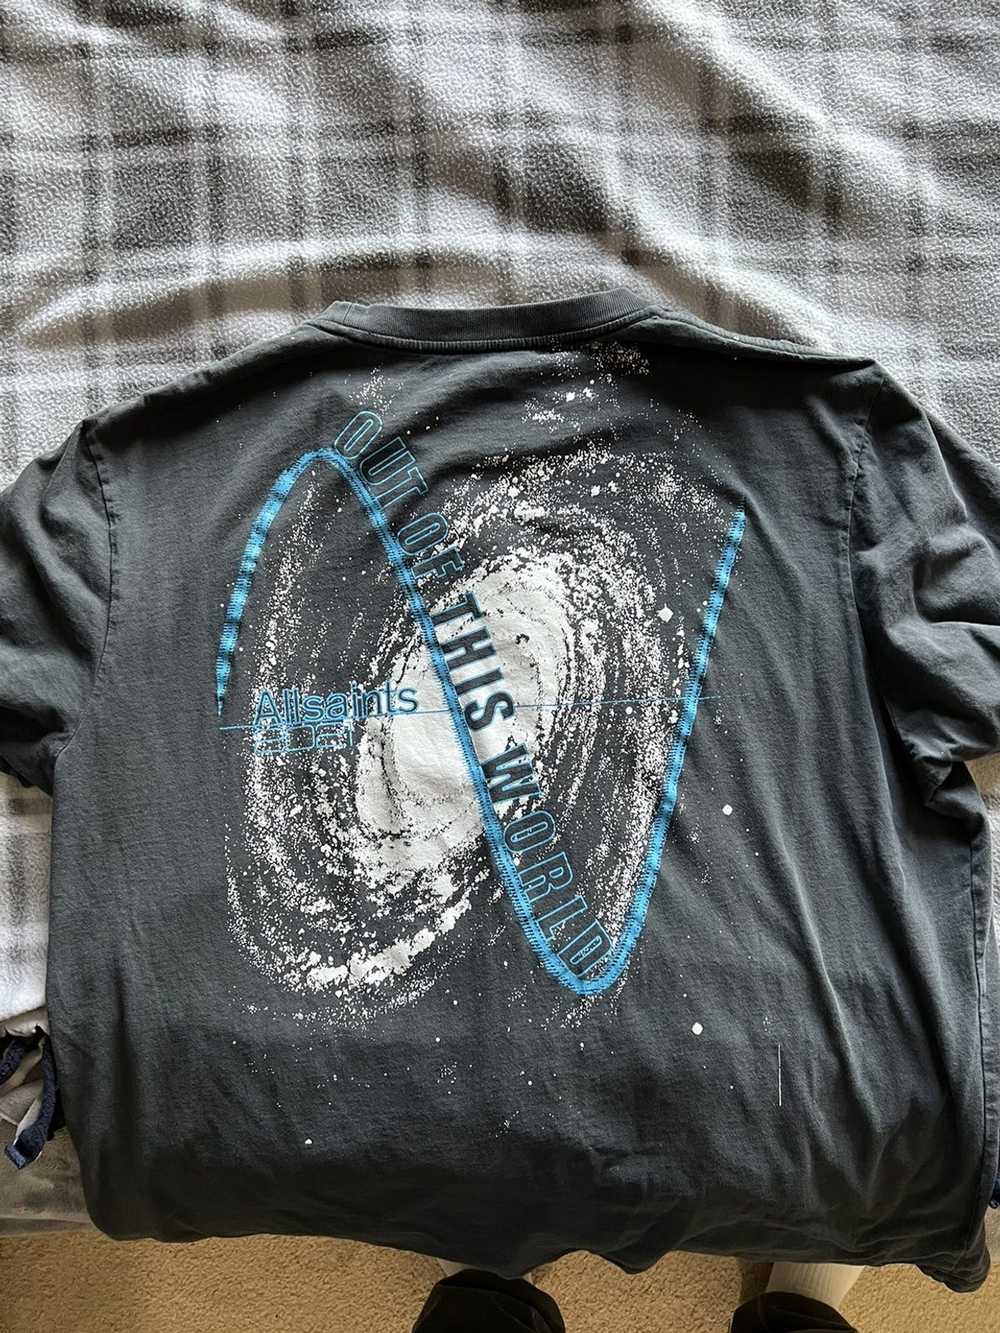 Allsaints Allsaints “Out of this world” Tee - image 3